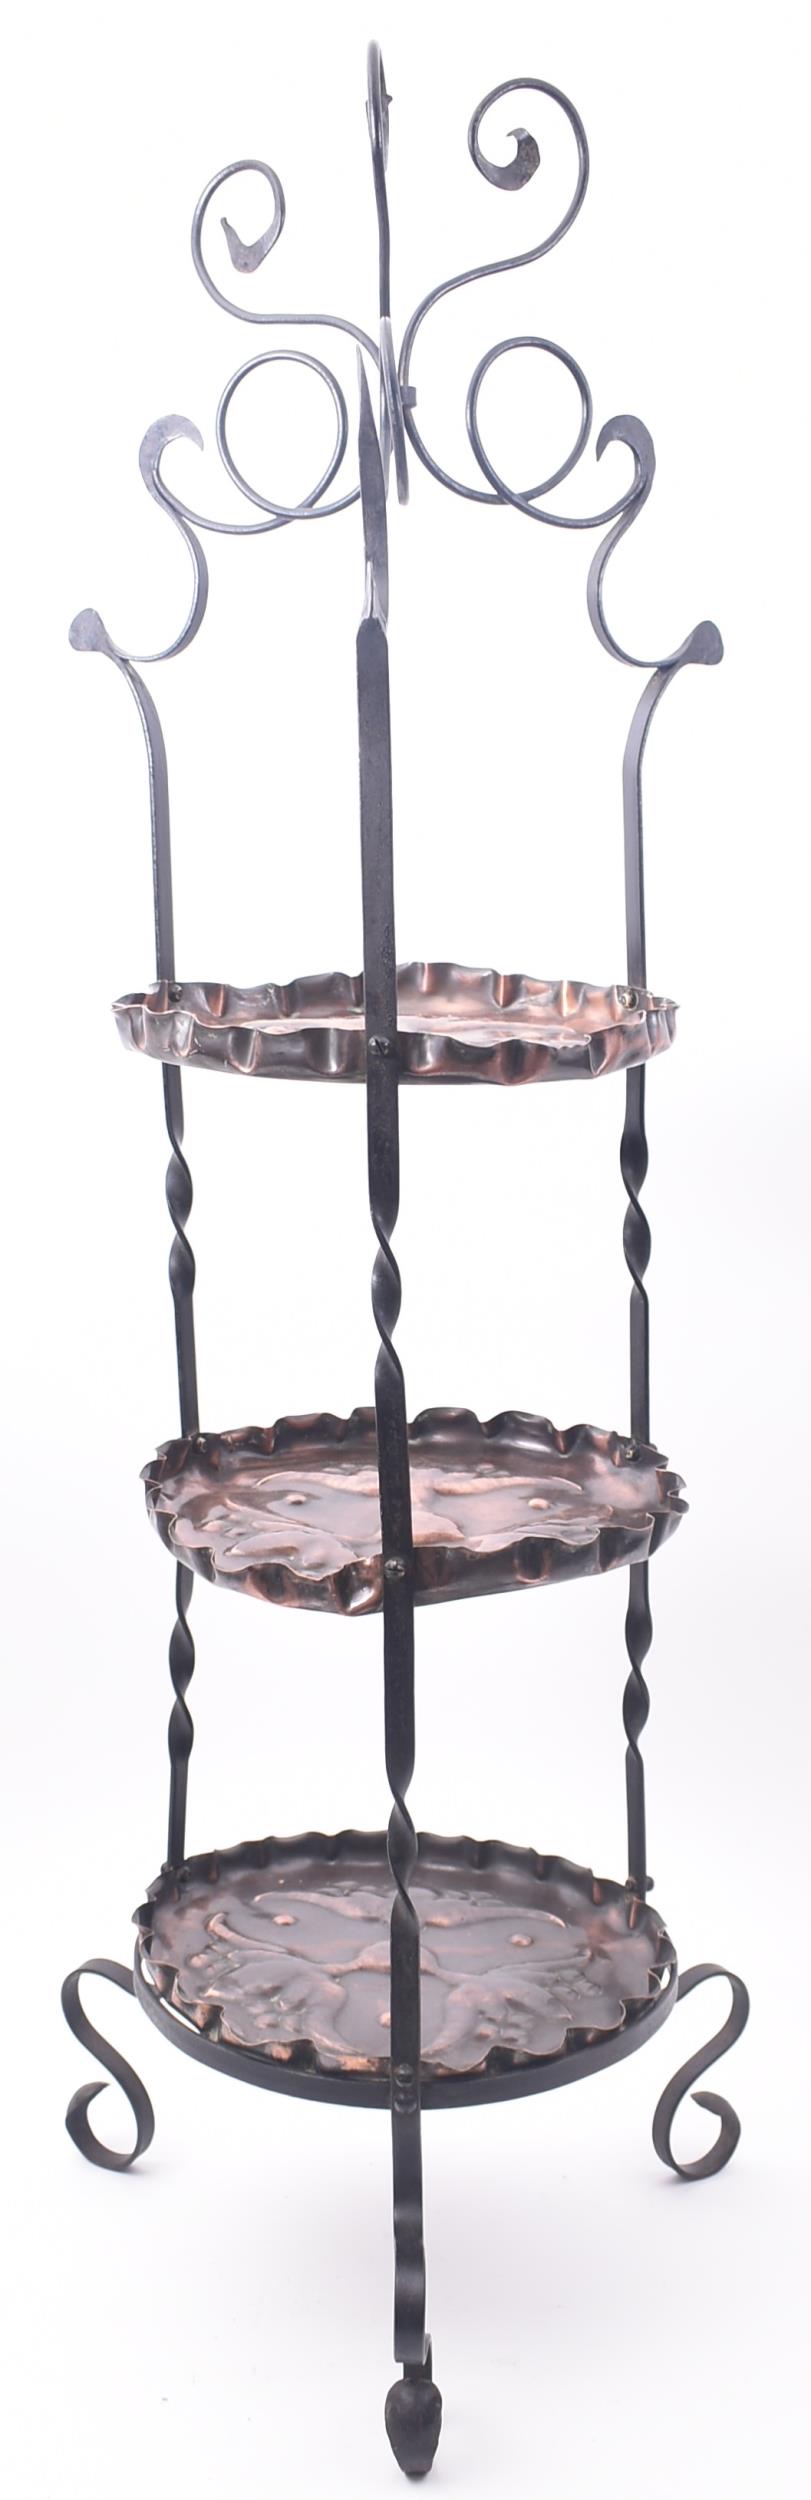 ART NOUVEAU COPPER & WROUGHT IRON CAKE STAND WHATNOT - Image 4 of 6